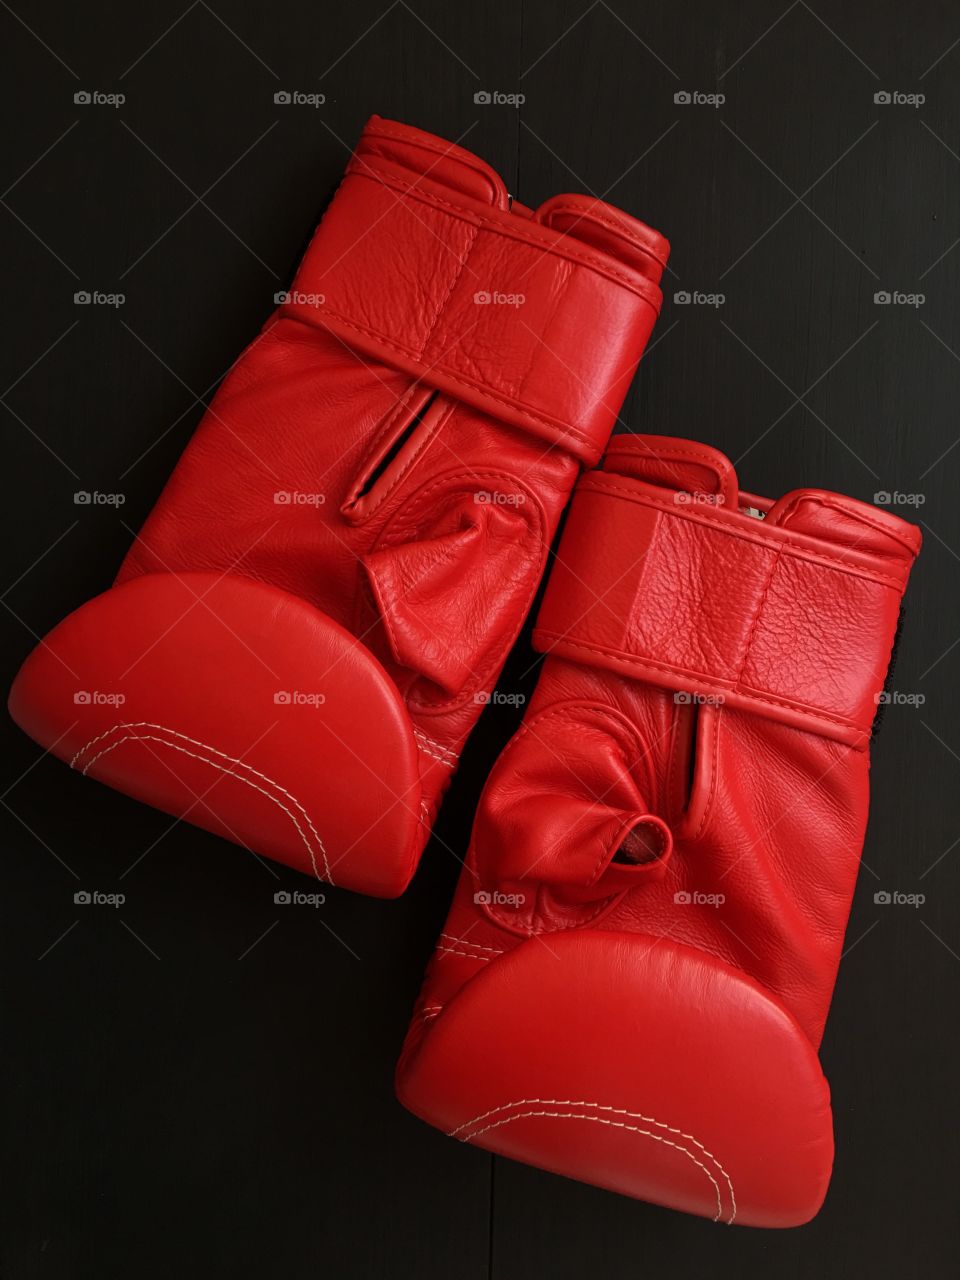 pair of red boxing gloves, top view